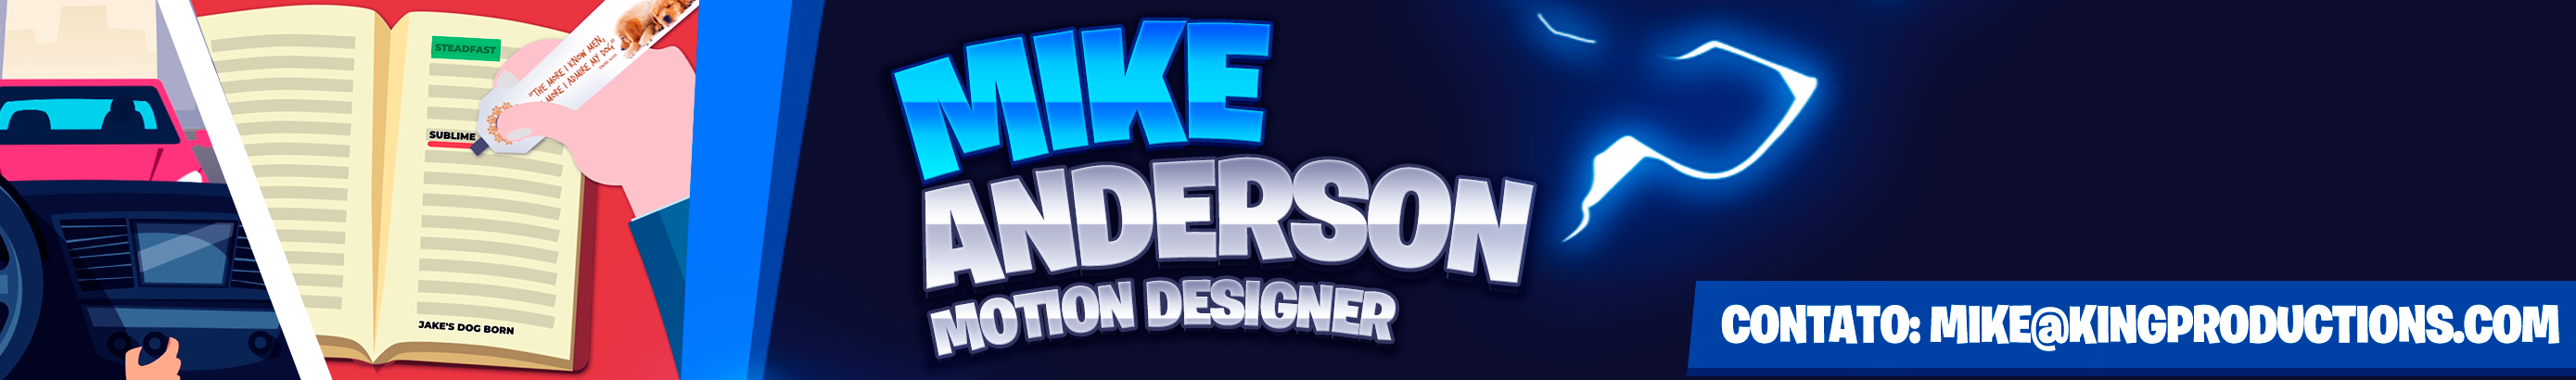 Mike Anderson's profile banner